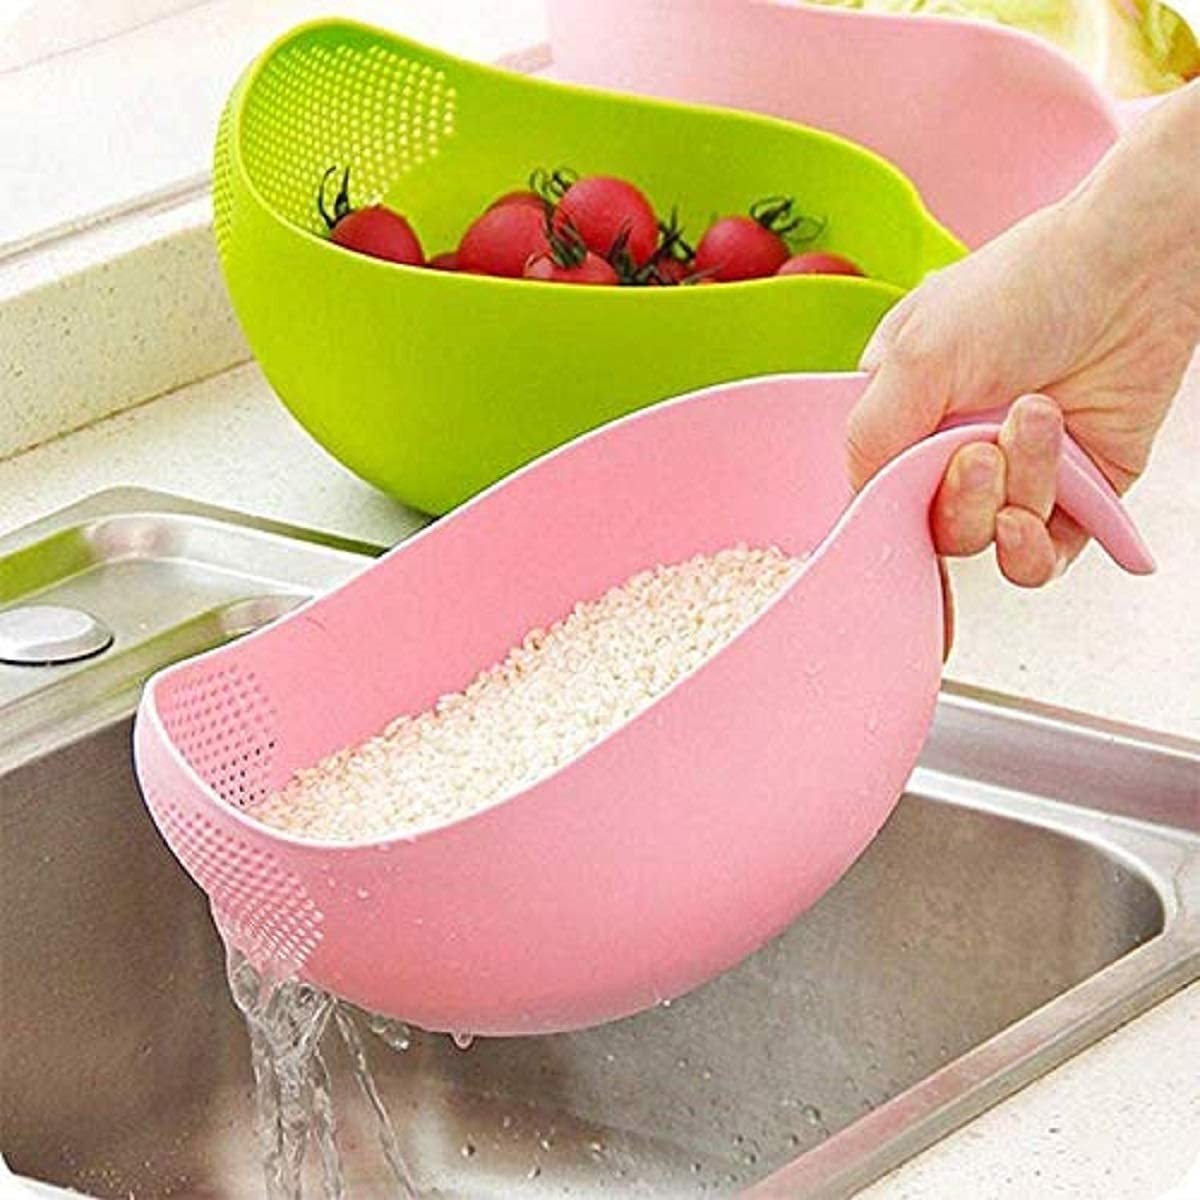 Washing Bowl Strainer for Rice, Fruits and Vegetables